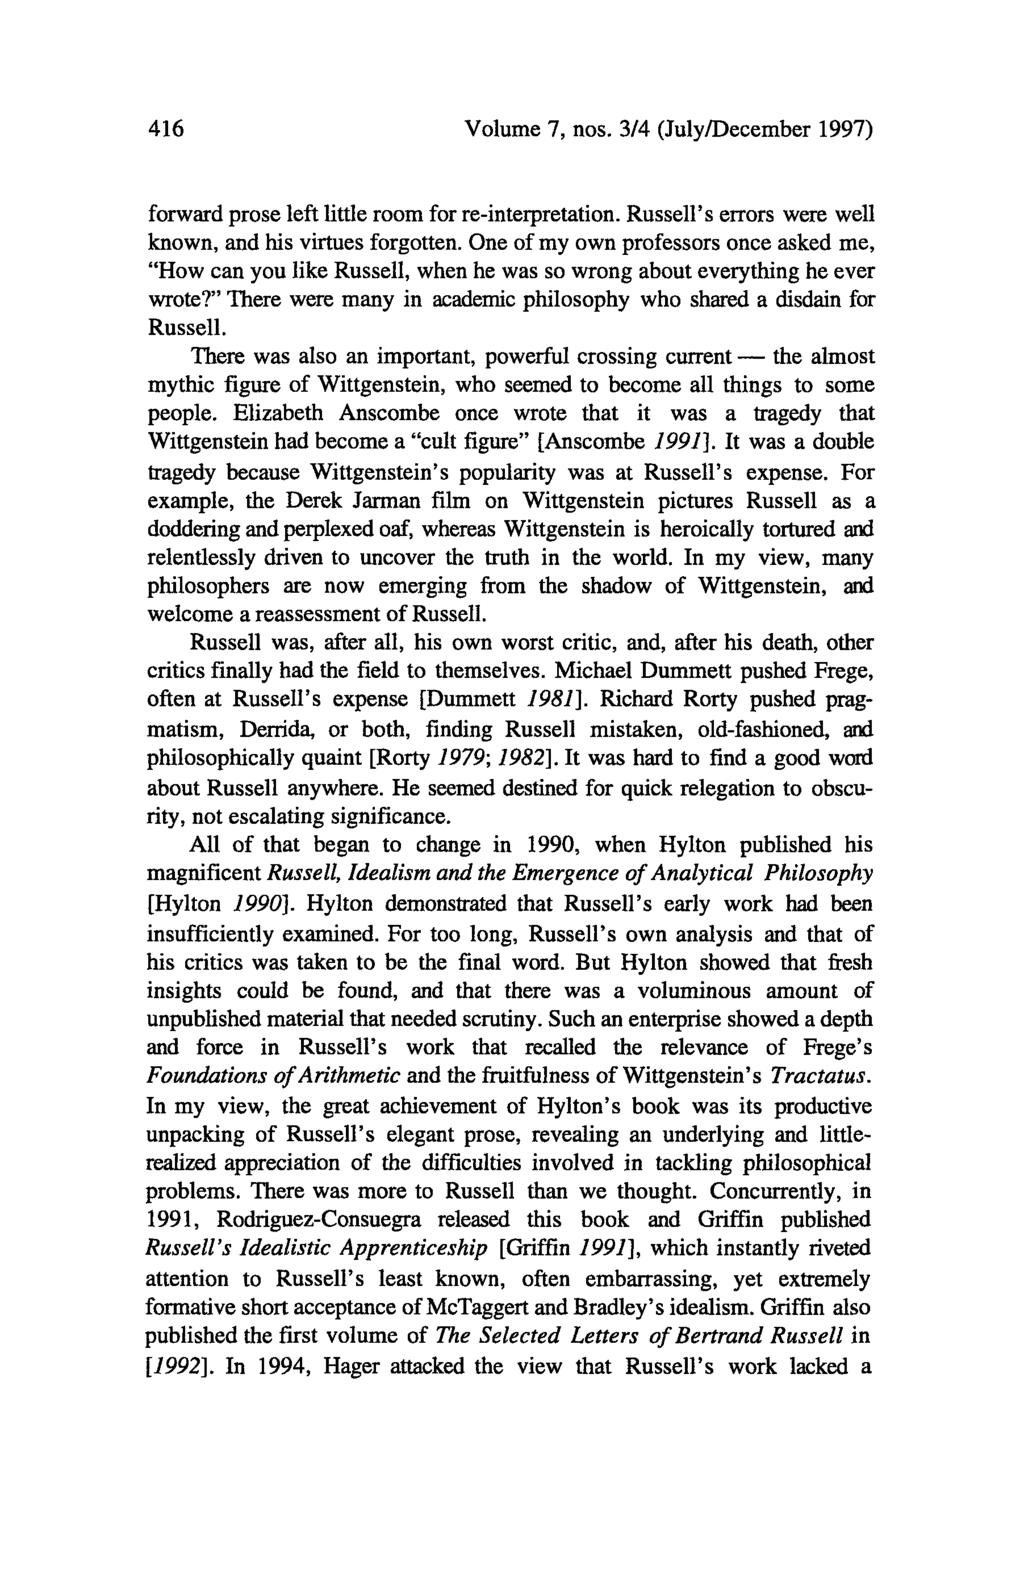 416 Volume 7, nos. 3/4 (July/December 1997) forward prose left little room for re-interpretation. Russell's errors were well known, and his virtues forgotten.